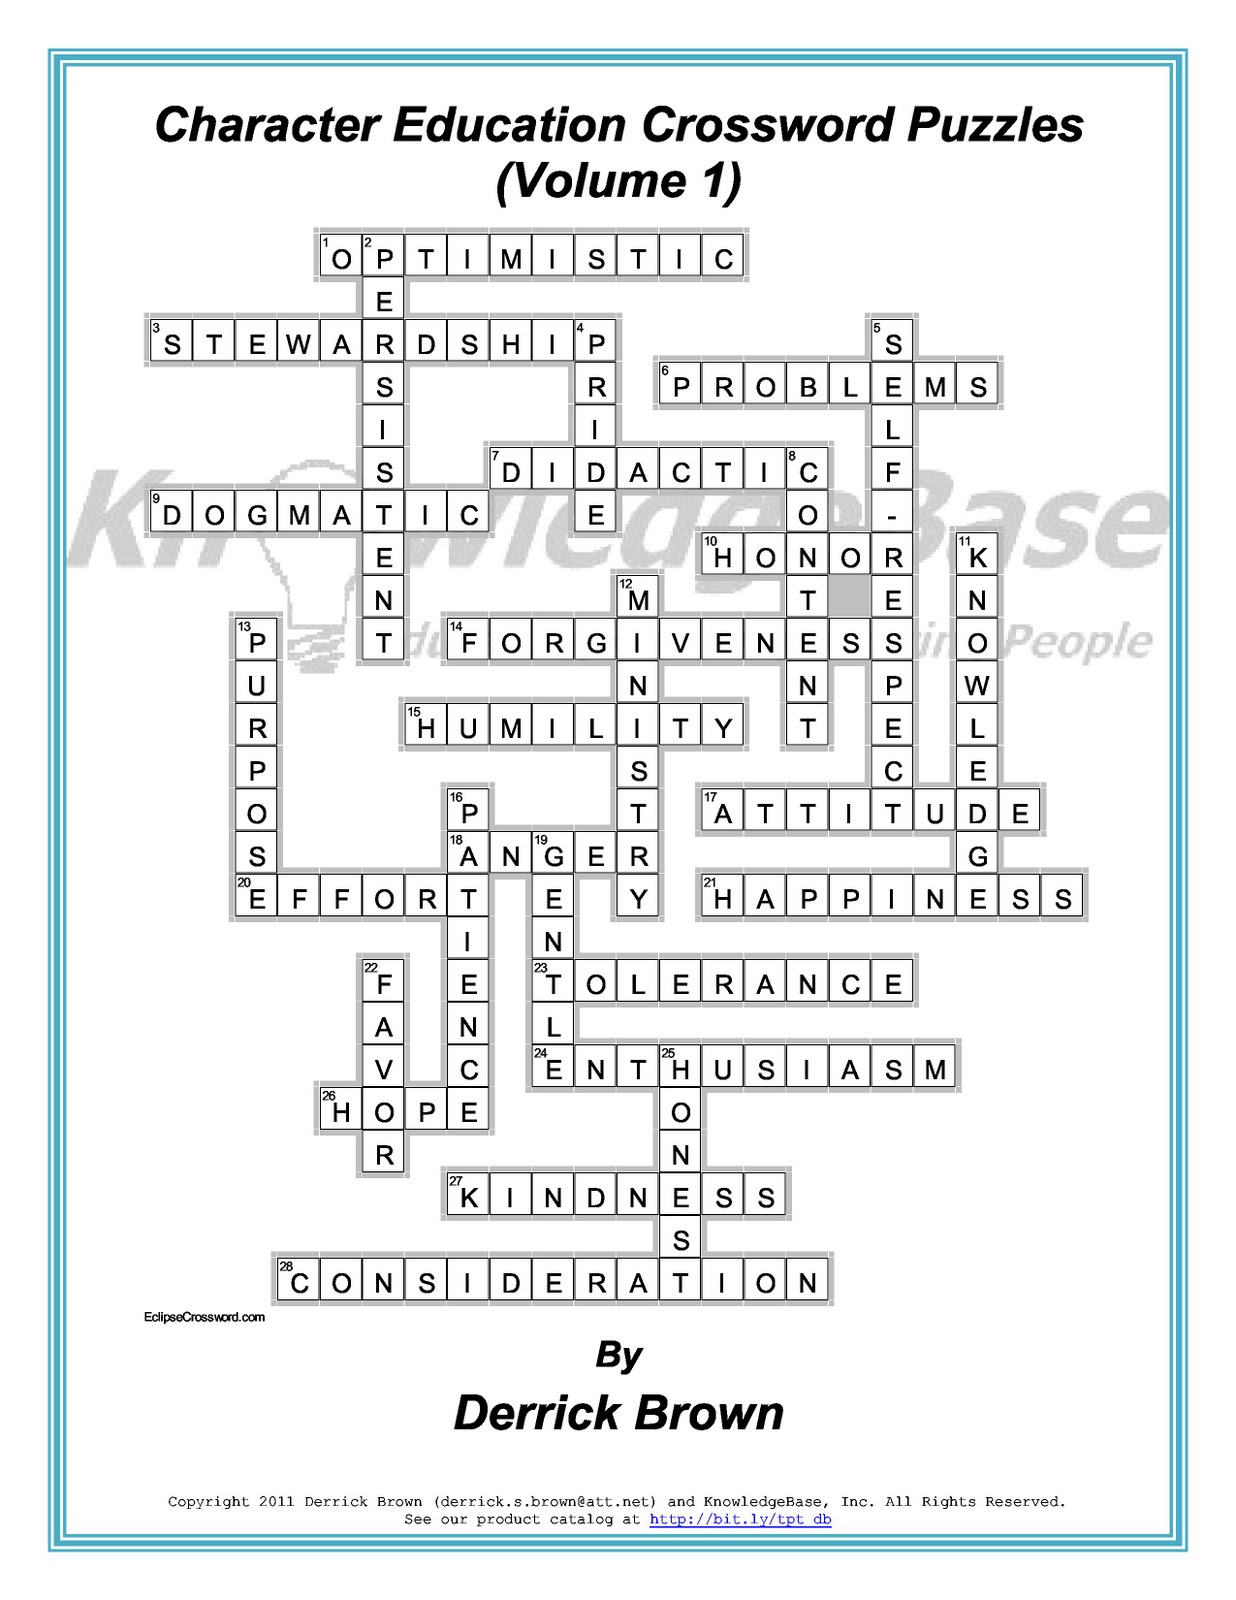 Character Education Crossword Puzzles